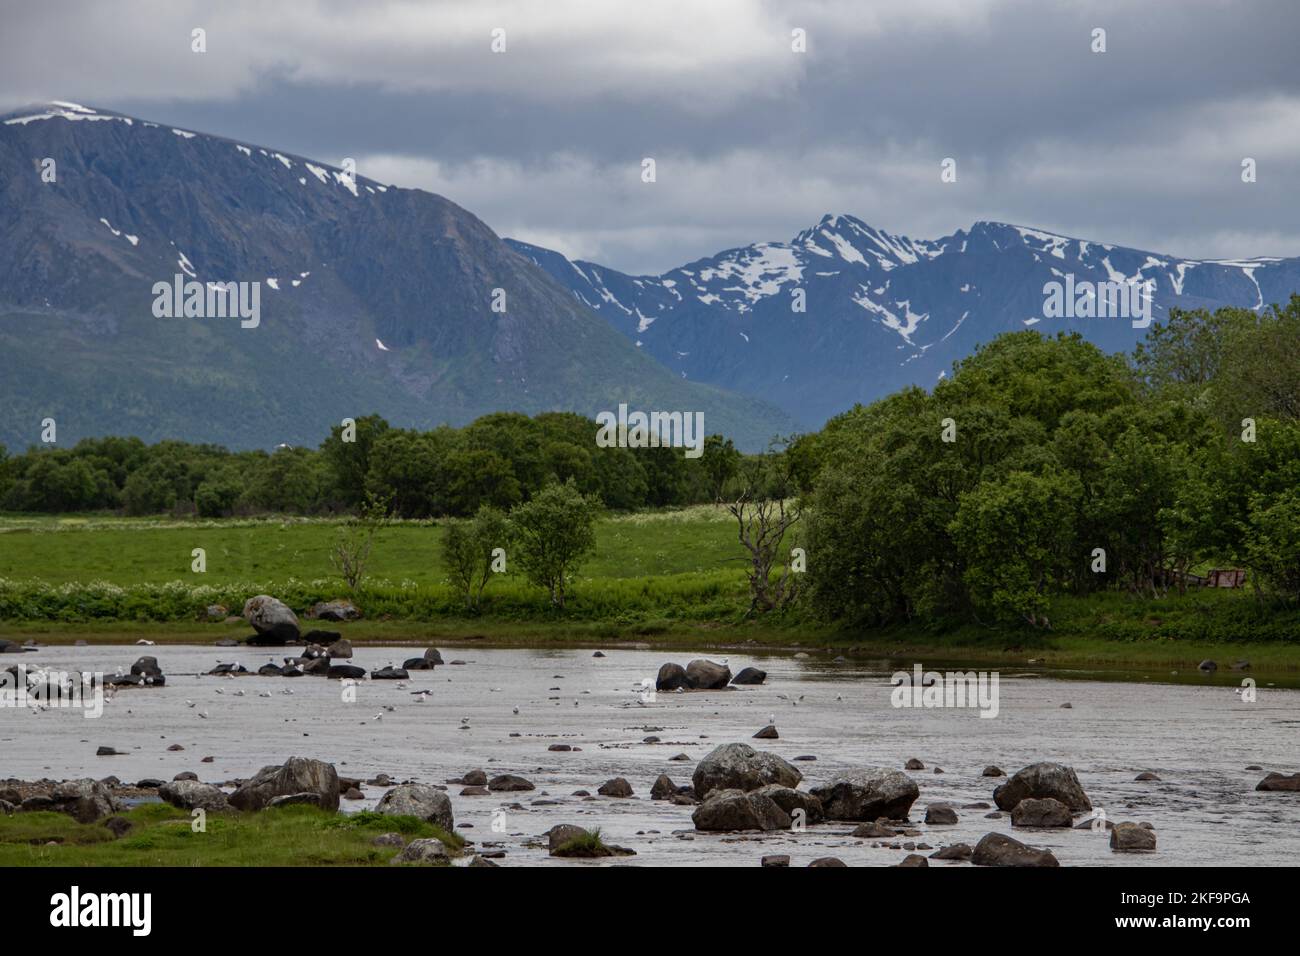 A landscape view of the Lofoten Archipelago with green fields and snowy mountain in Norway Stock Photo